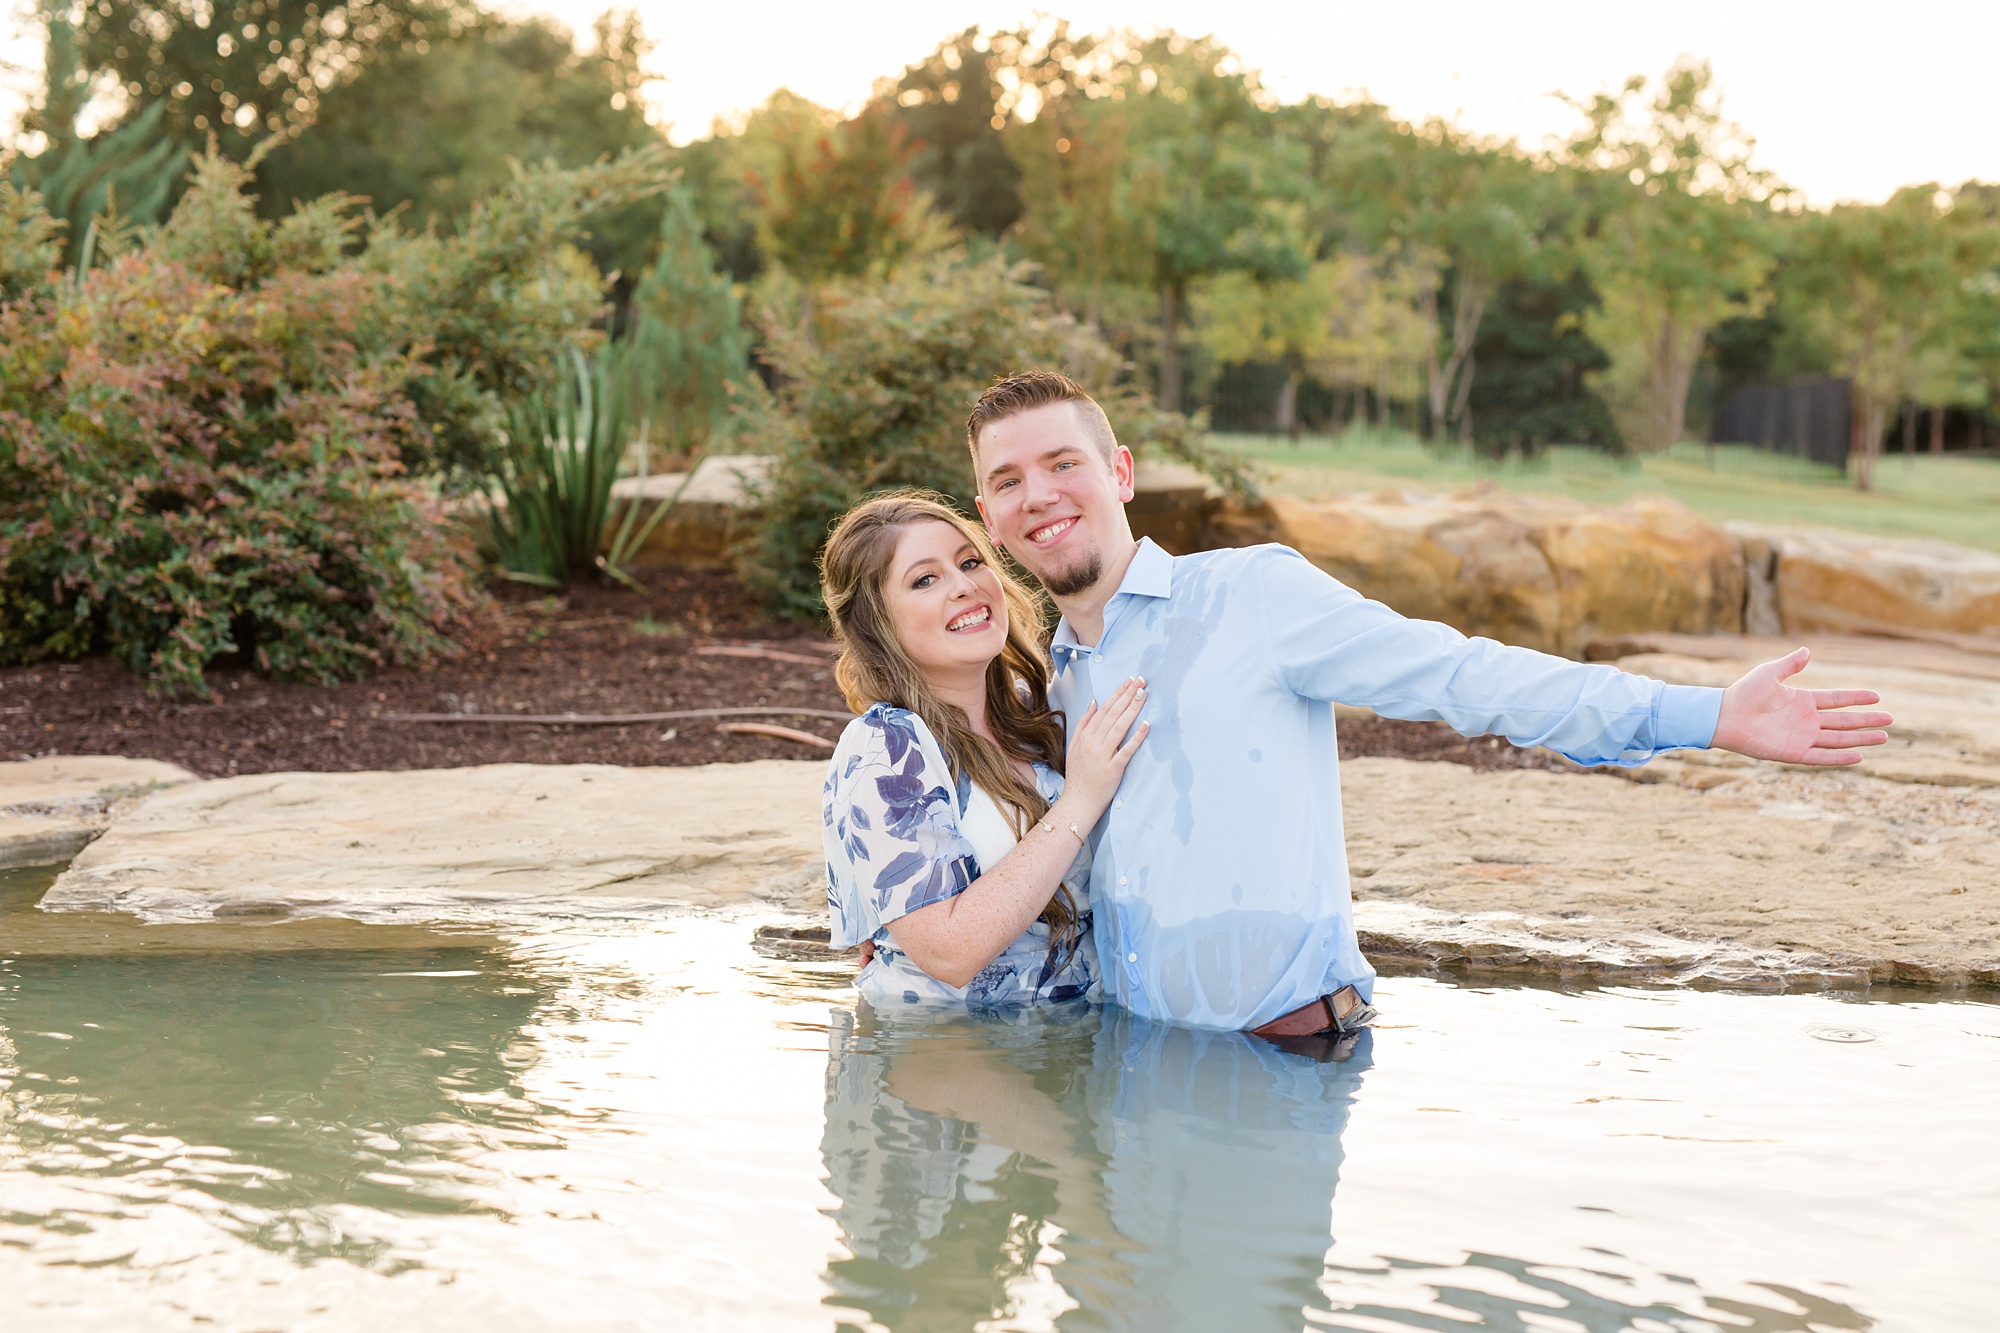 playful engagement portraits in Dallas TX